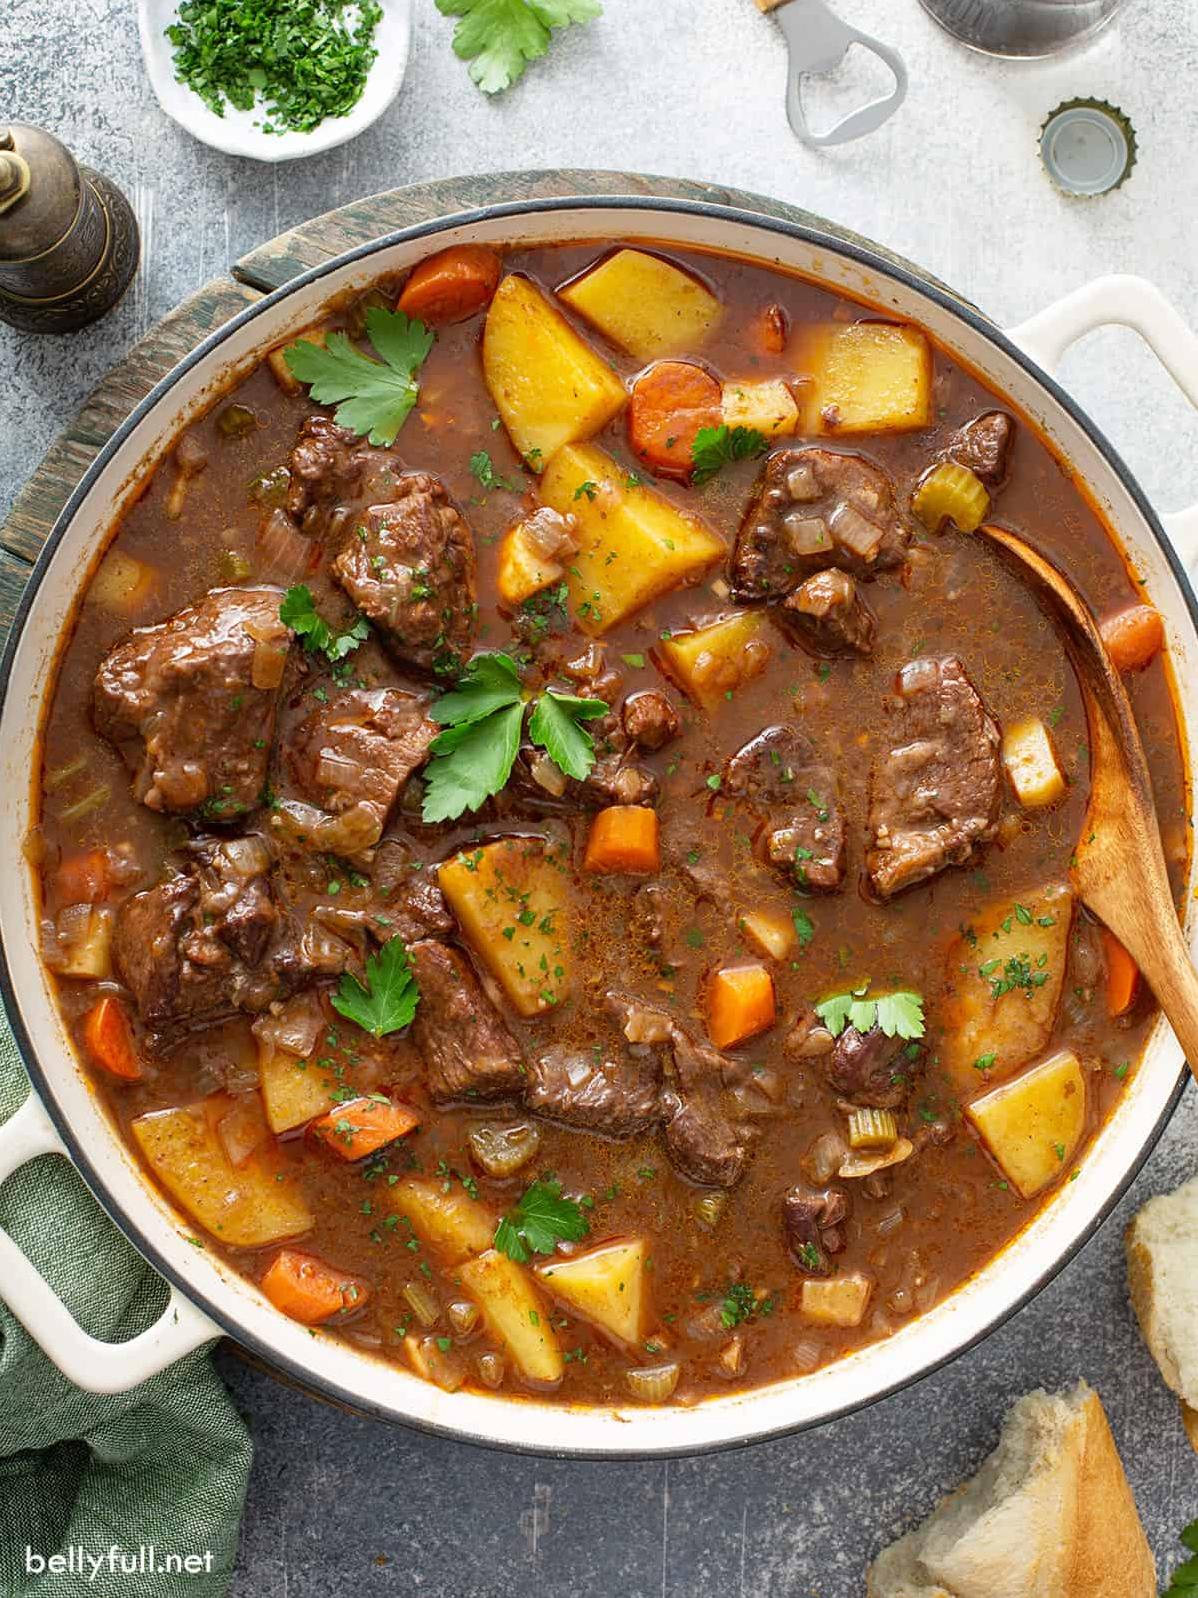  Warm up your kitchen and your soul with the delicious aromas of this Irish stew.